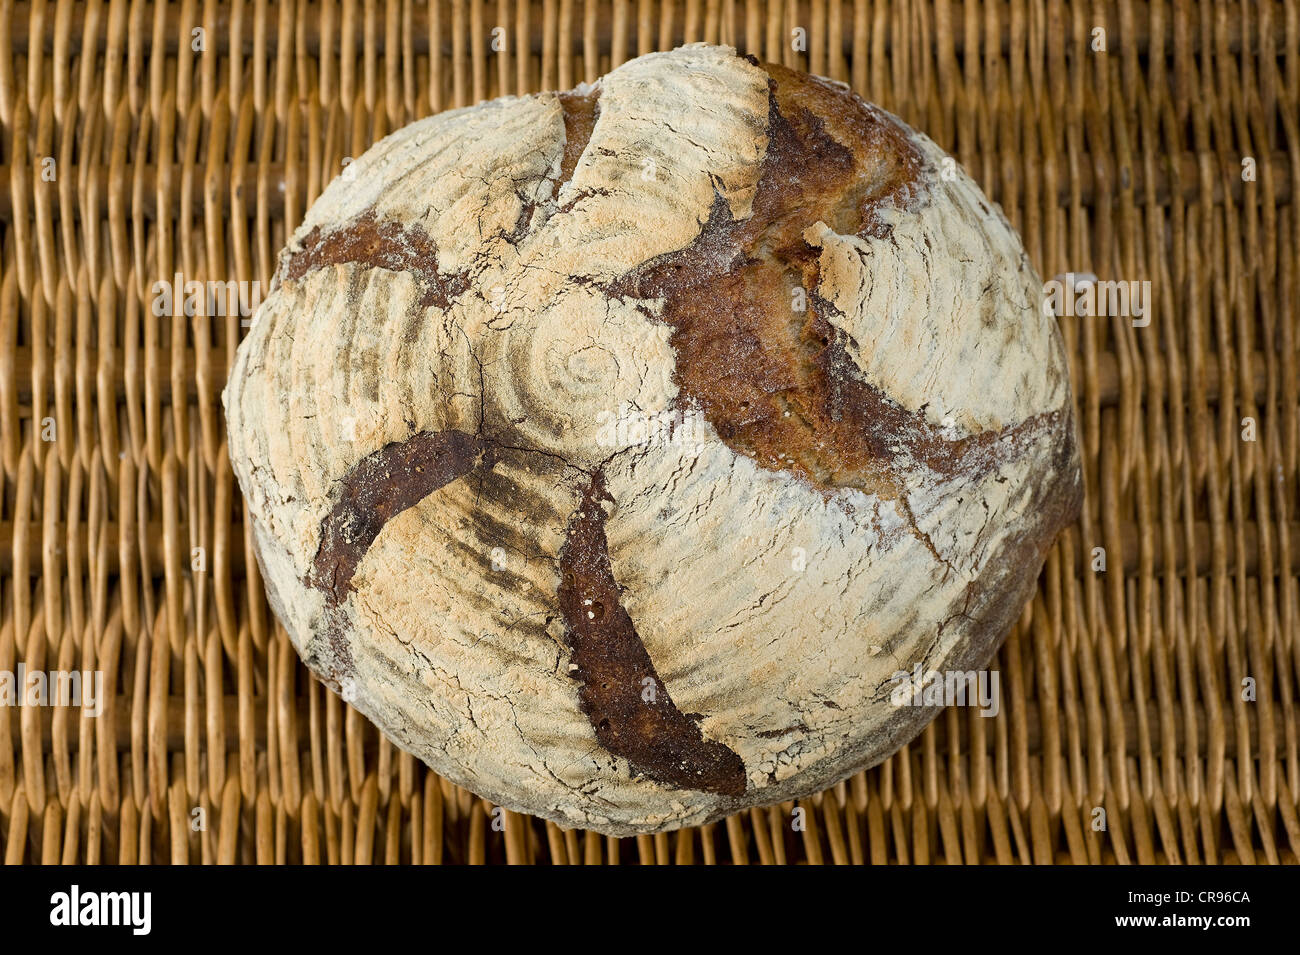 Rye bread with Manitoba flour, recipe is available Stock Photo